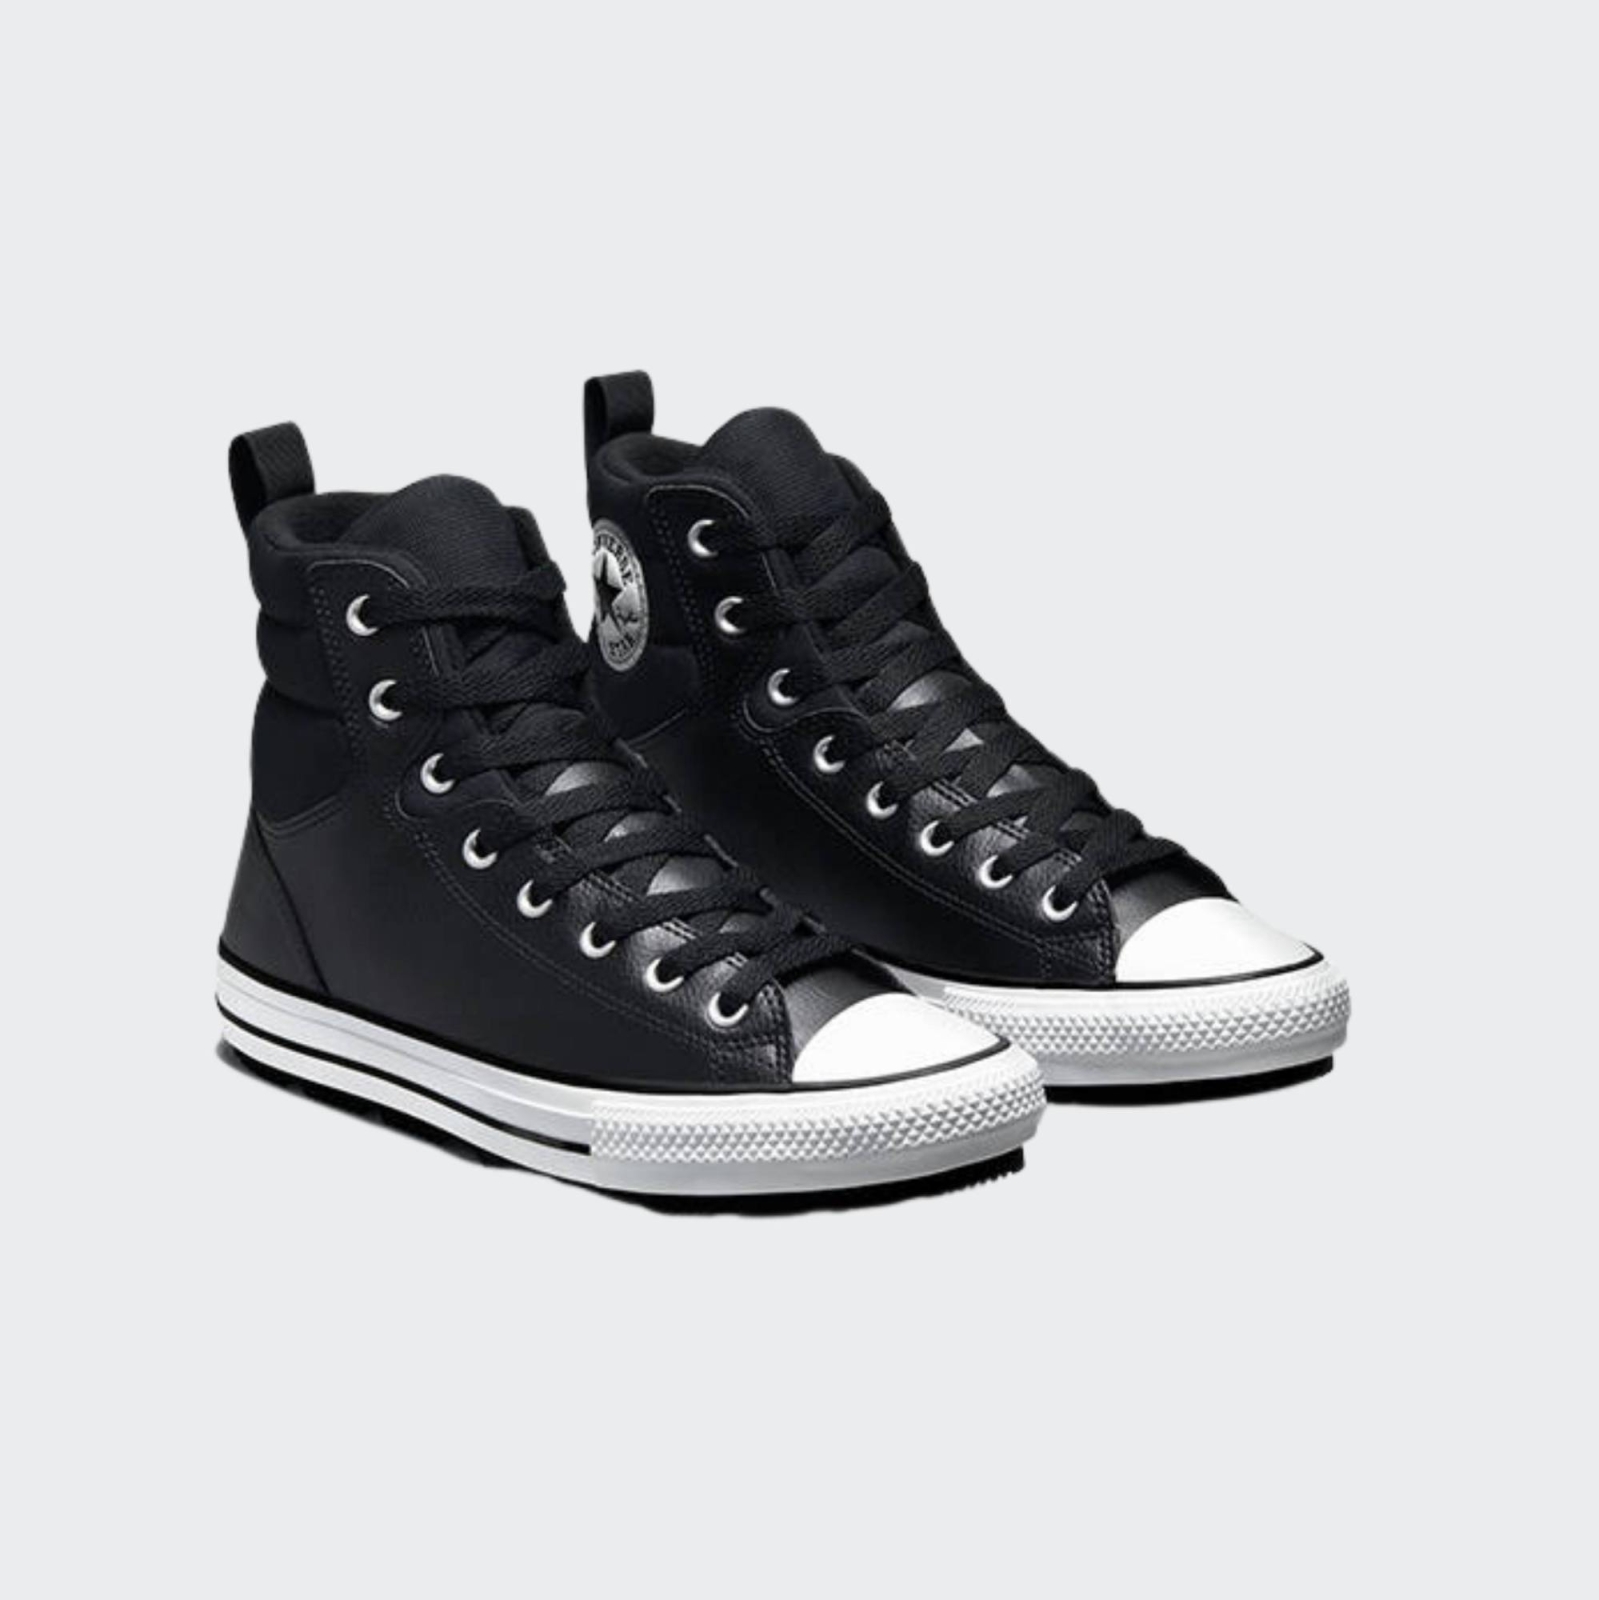 CONVERSE CHUCK TAYLOR ALL STAR FAUX LEATHER BERKSHIRE BOOT